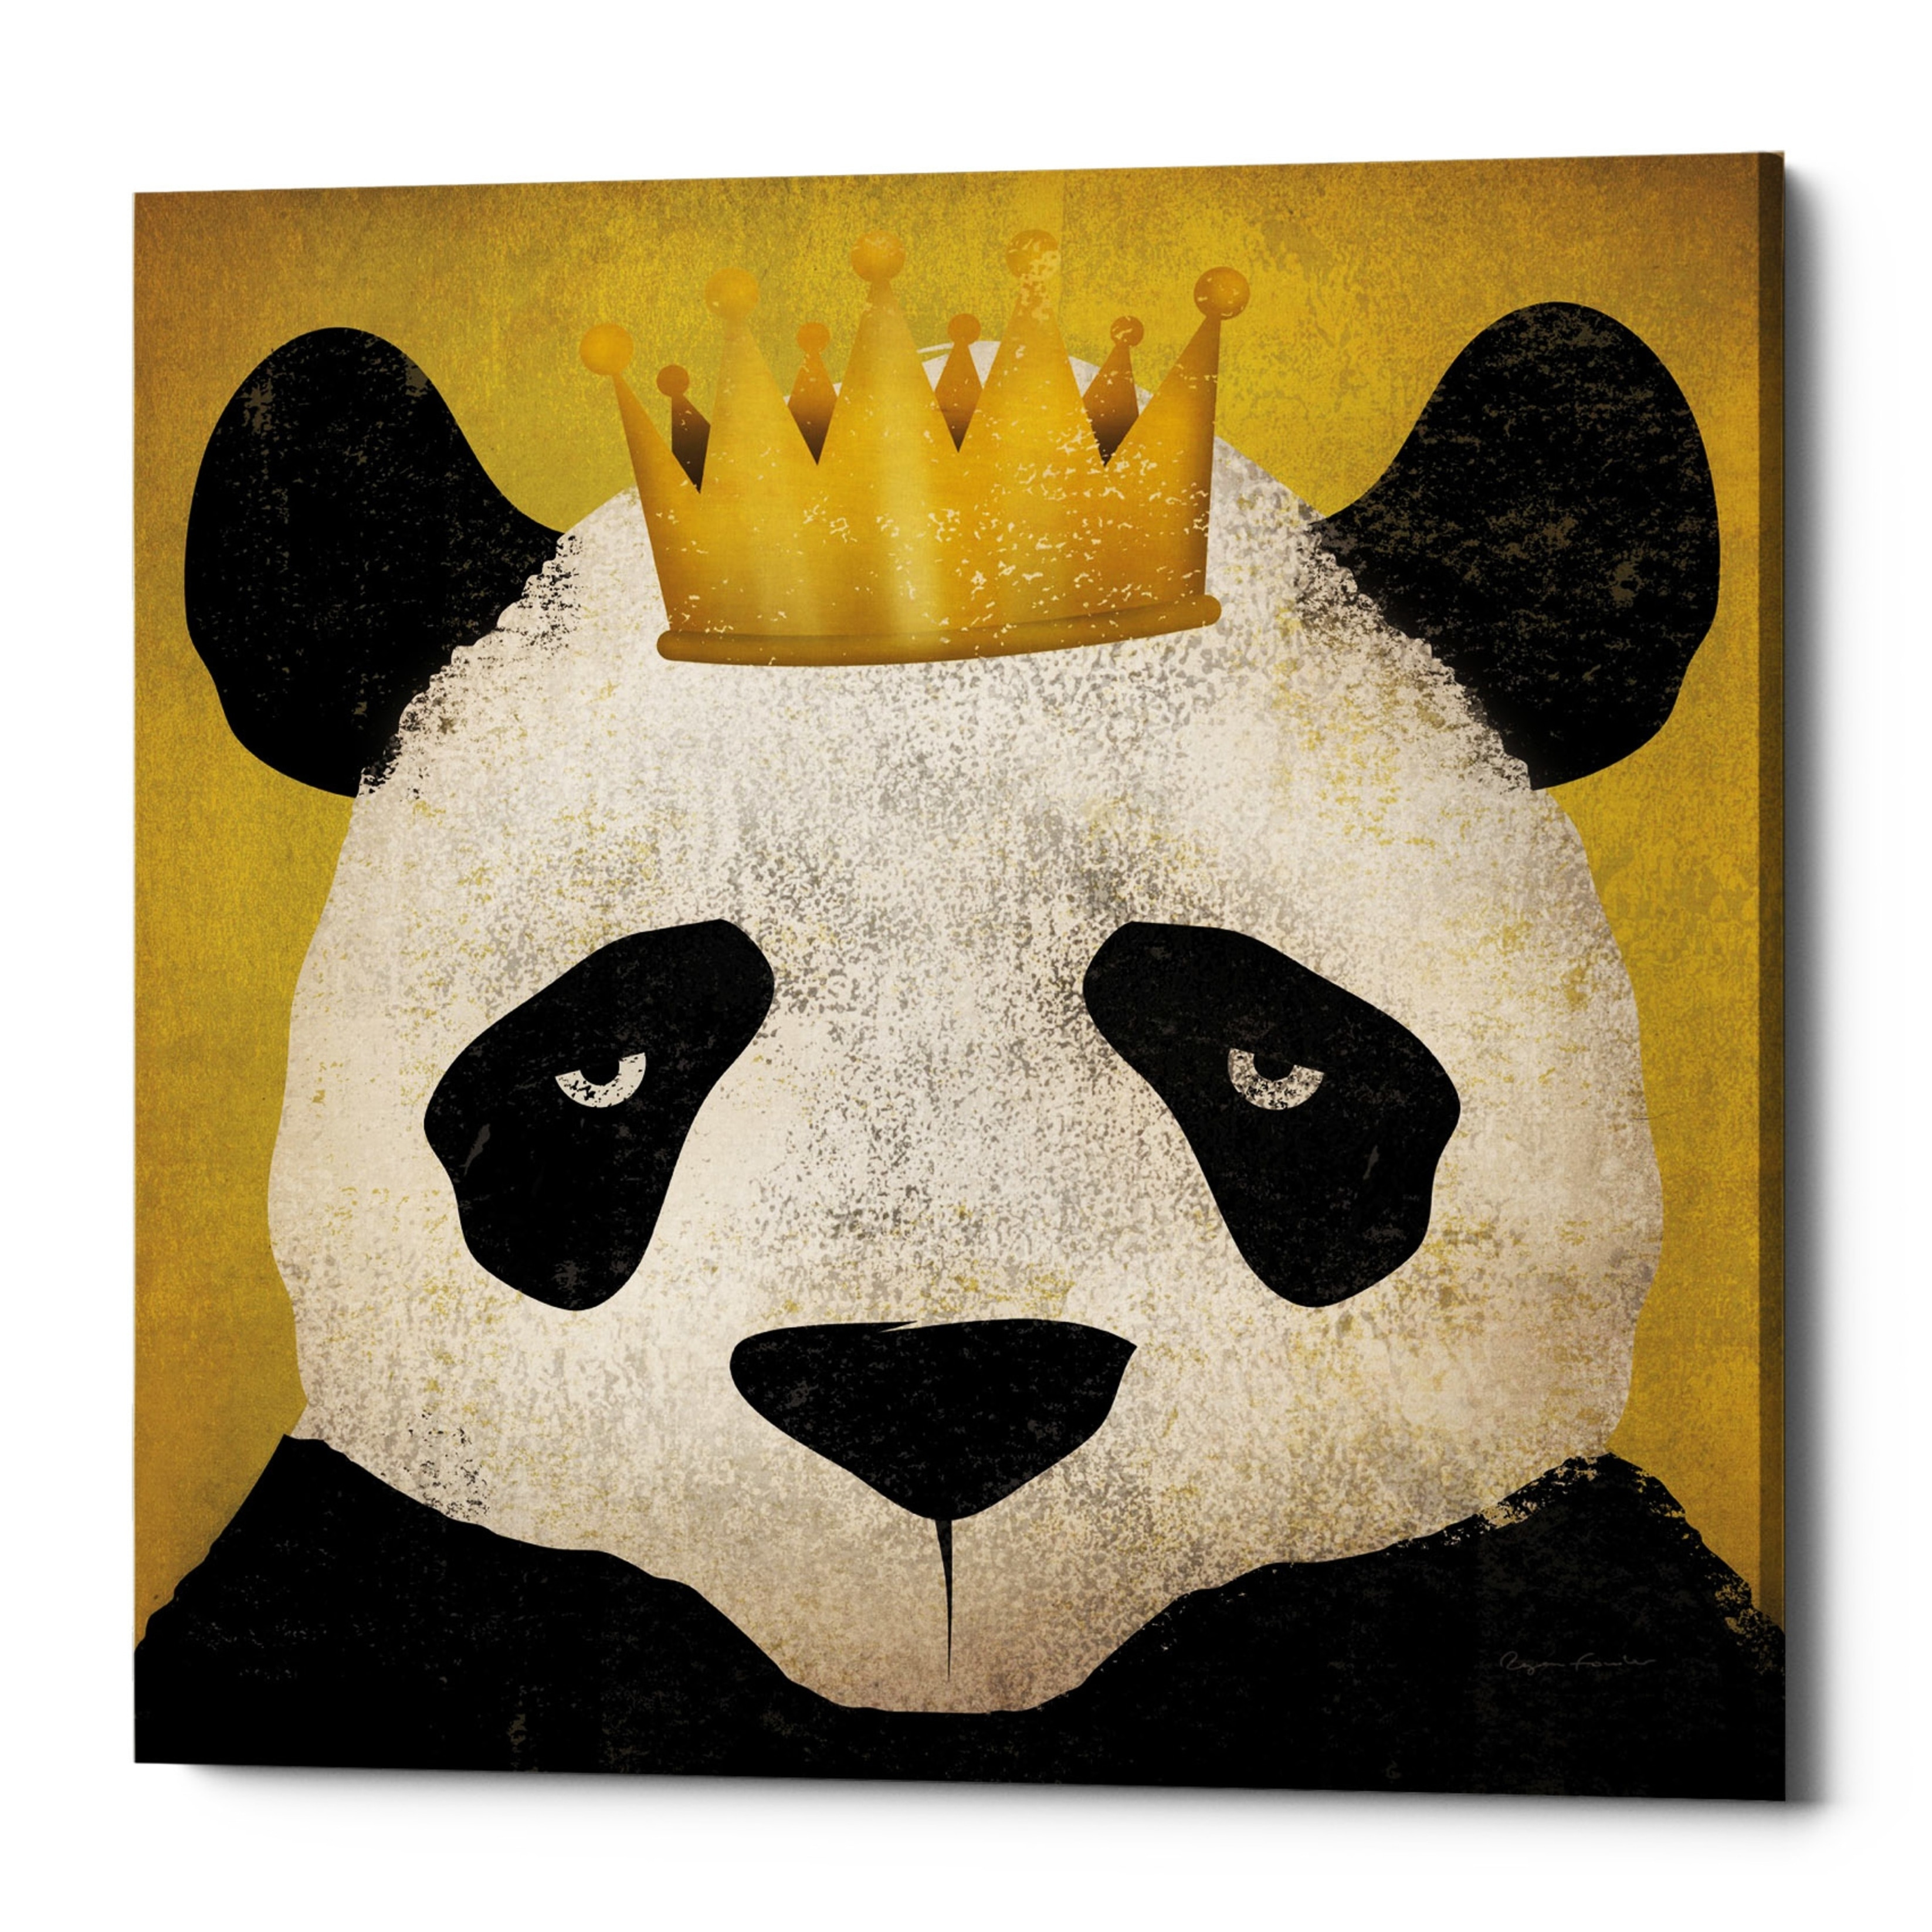 Shop Epic Graffiti Panda With Crown By Ryan Fowler Giclee Canvas Wall Art Overstock 25624025